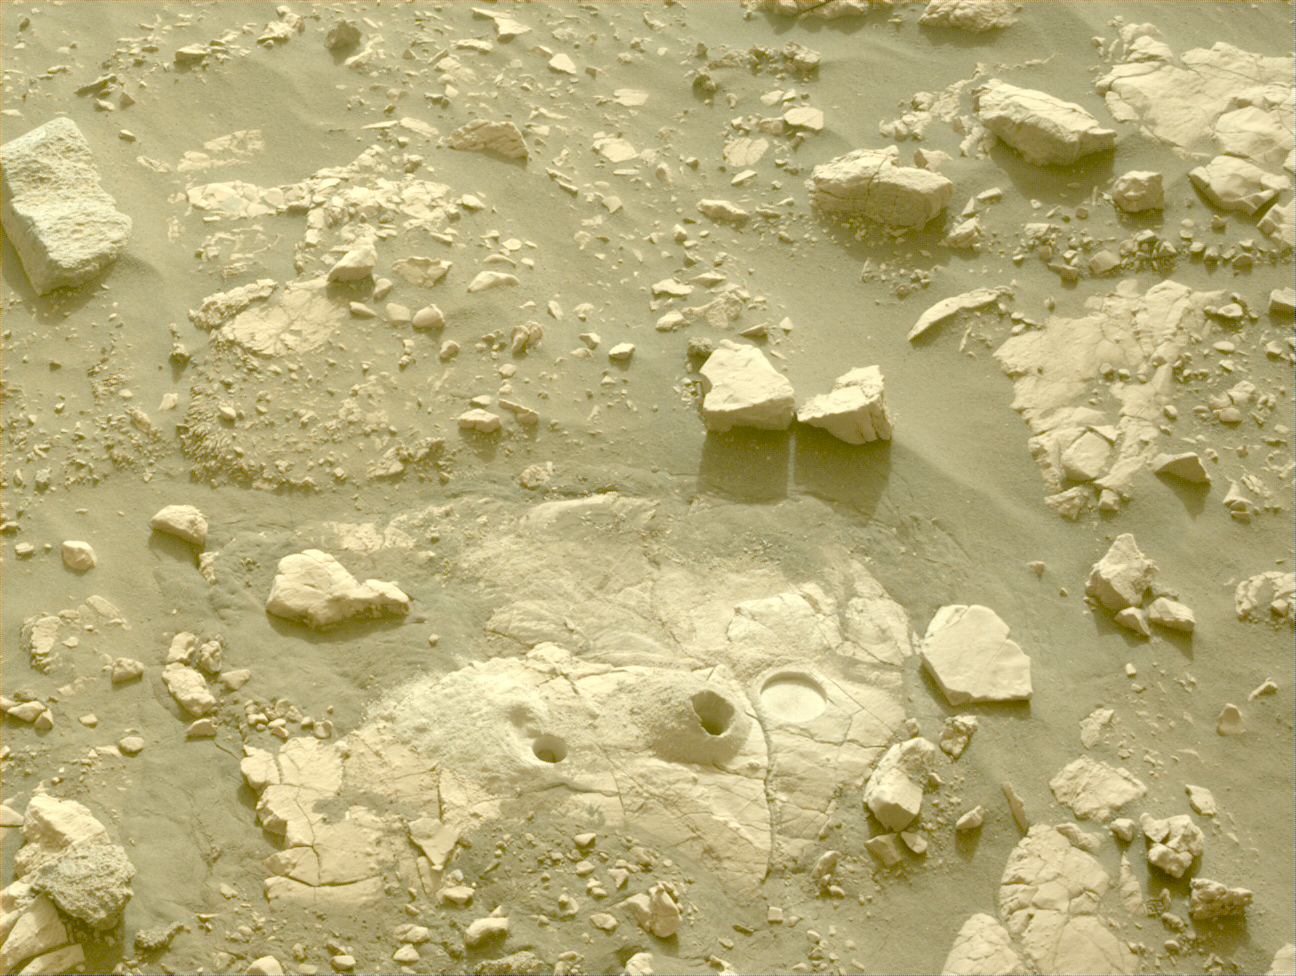 Image taken was taken by the Mars Perseverance rover after collecting the rock sample 13 at Bearwallow. There are two drill holes and an abrasion patch in this photo.